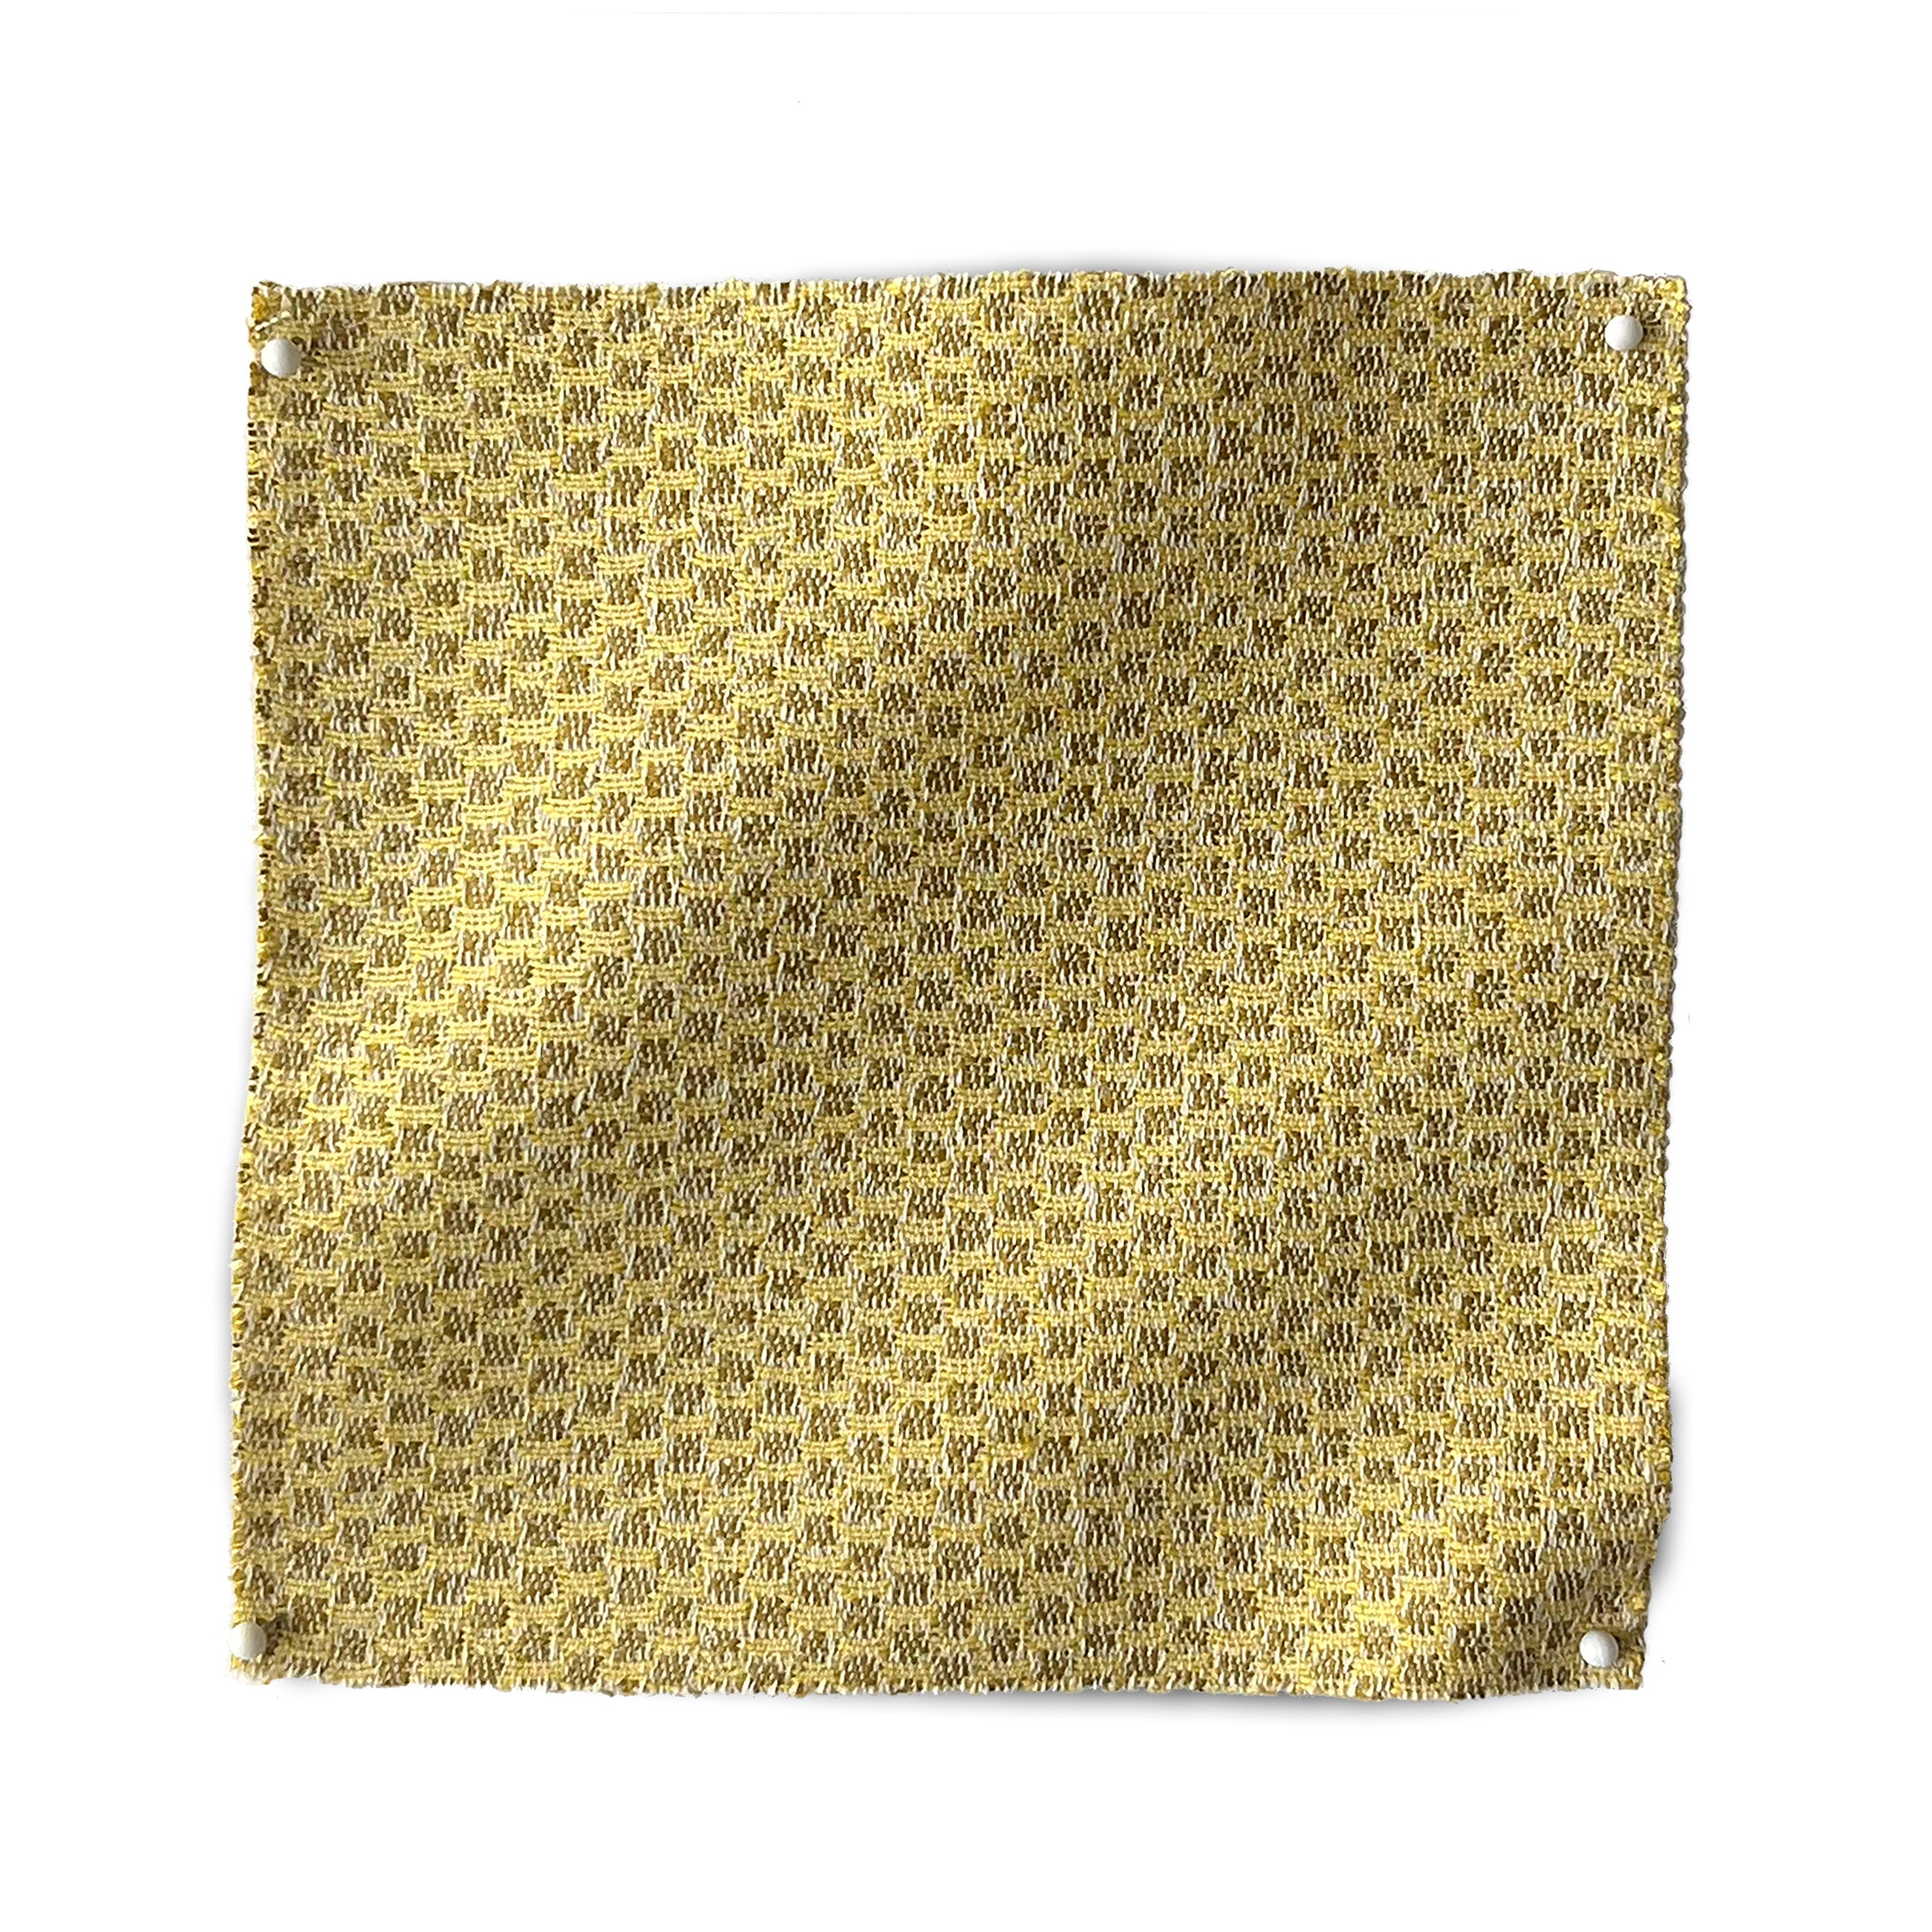 Detail of the reverse side of fabric in a dense checked weave in gold and tan.